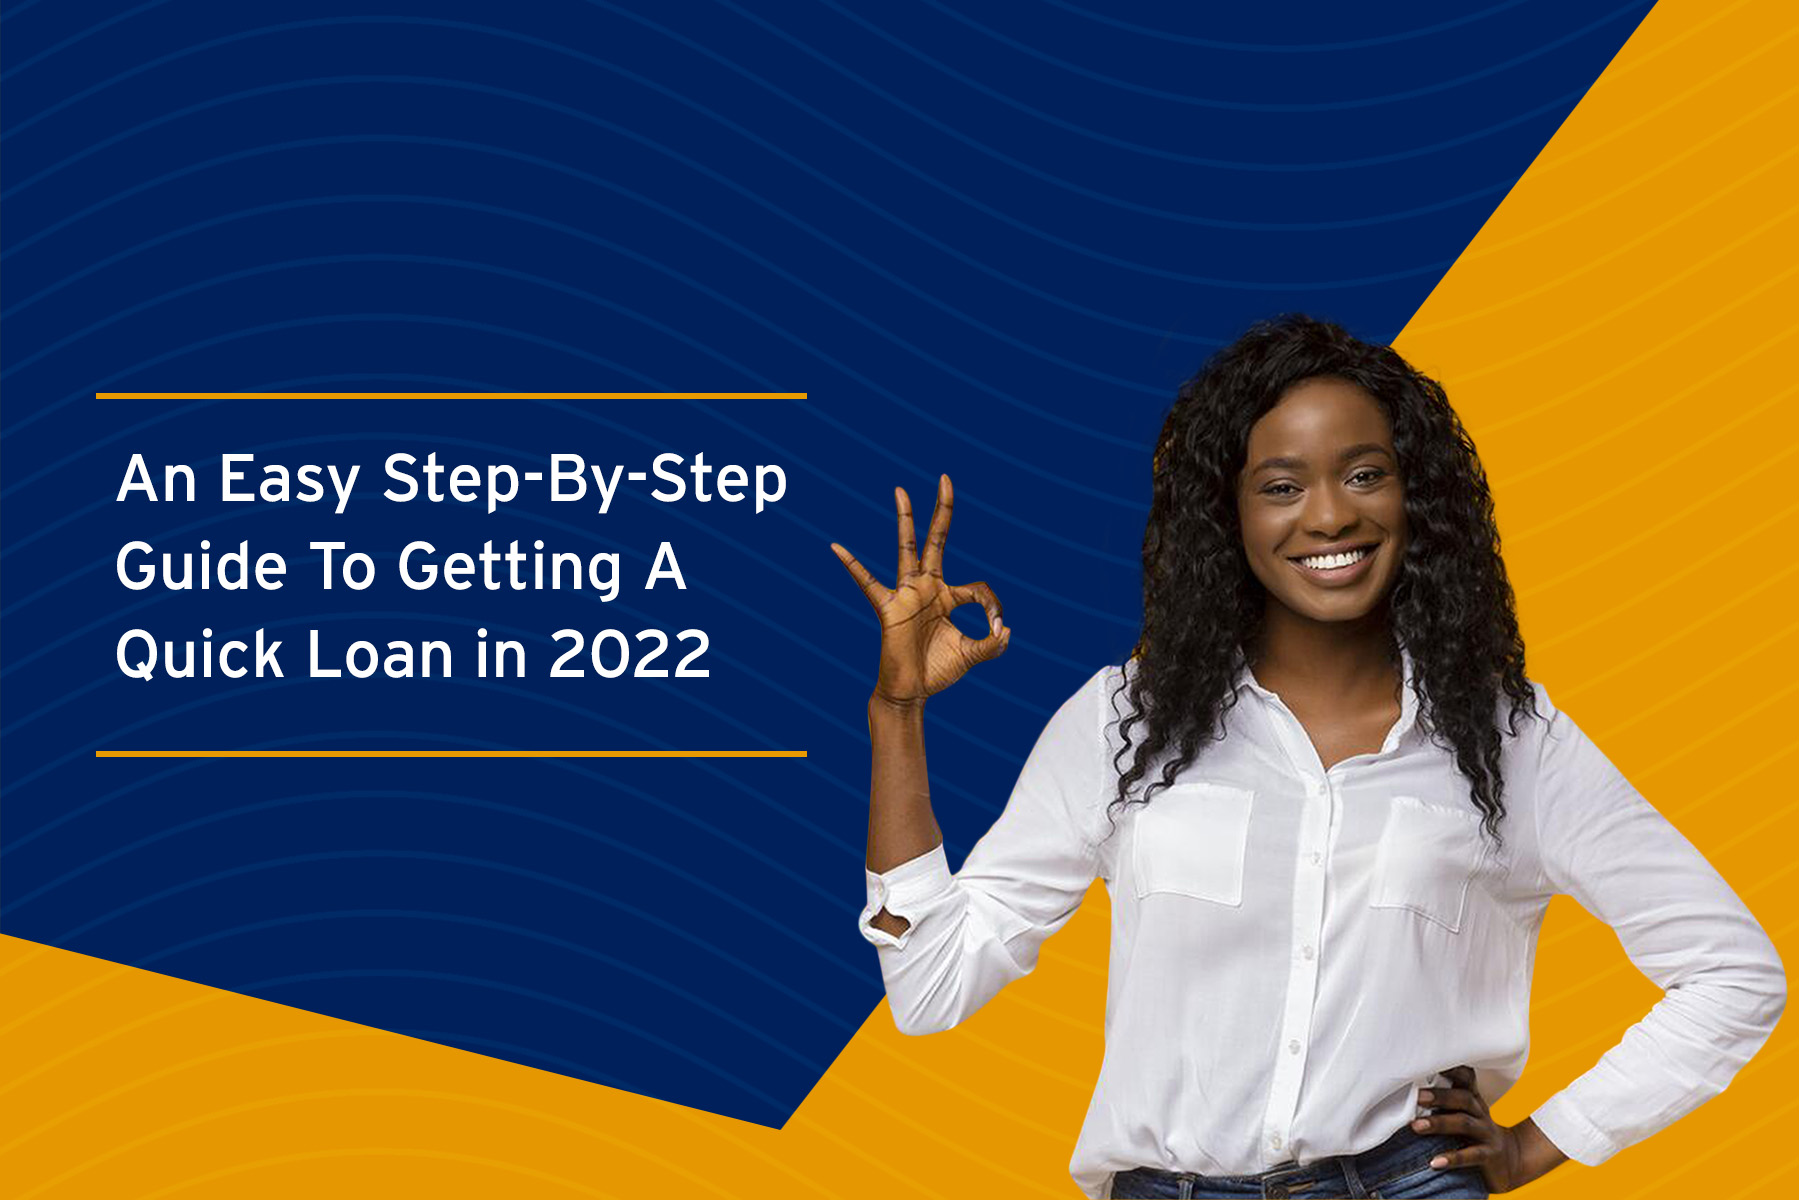 An Easy Step-By-Step Guide to Getting a Quick Loan in 2022